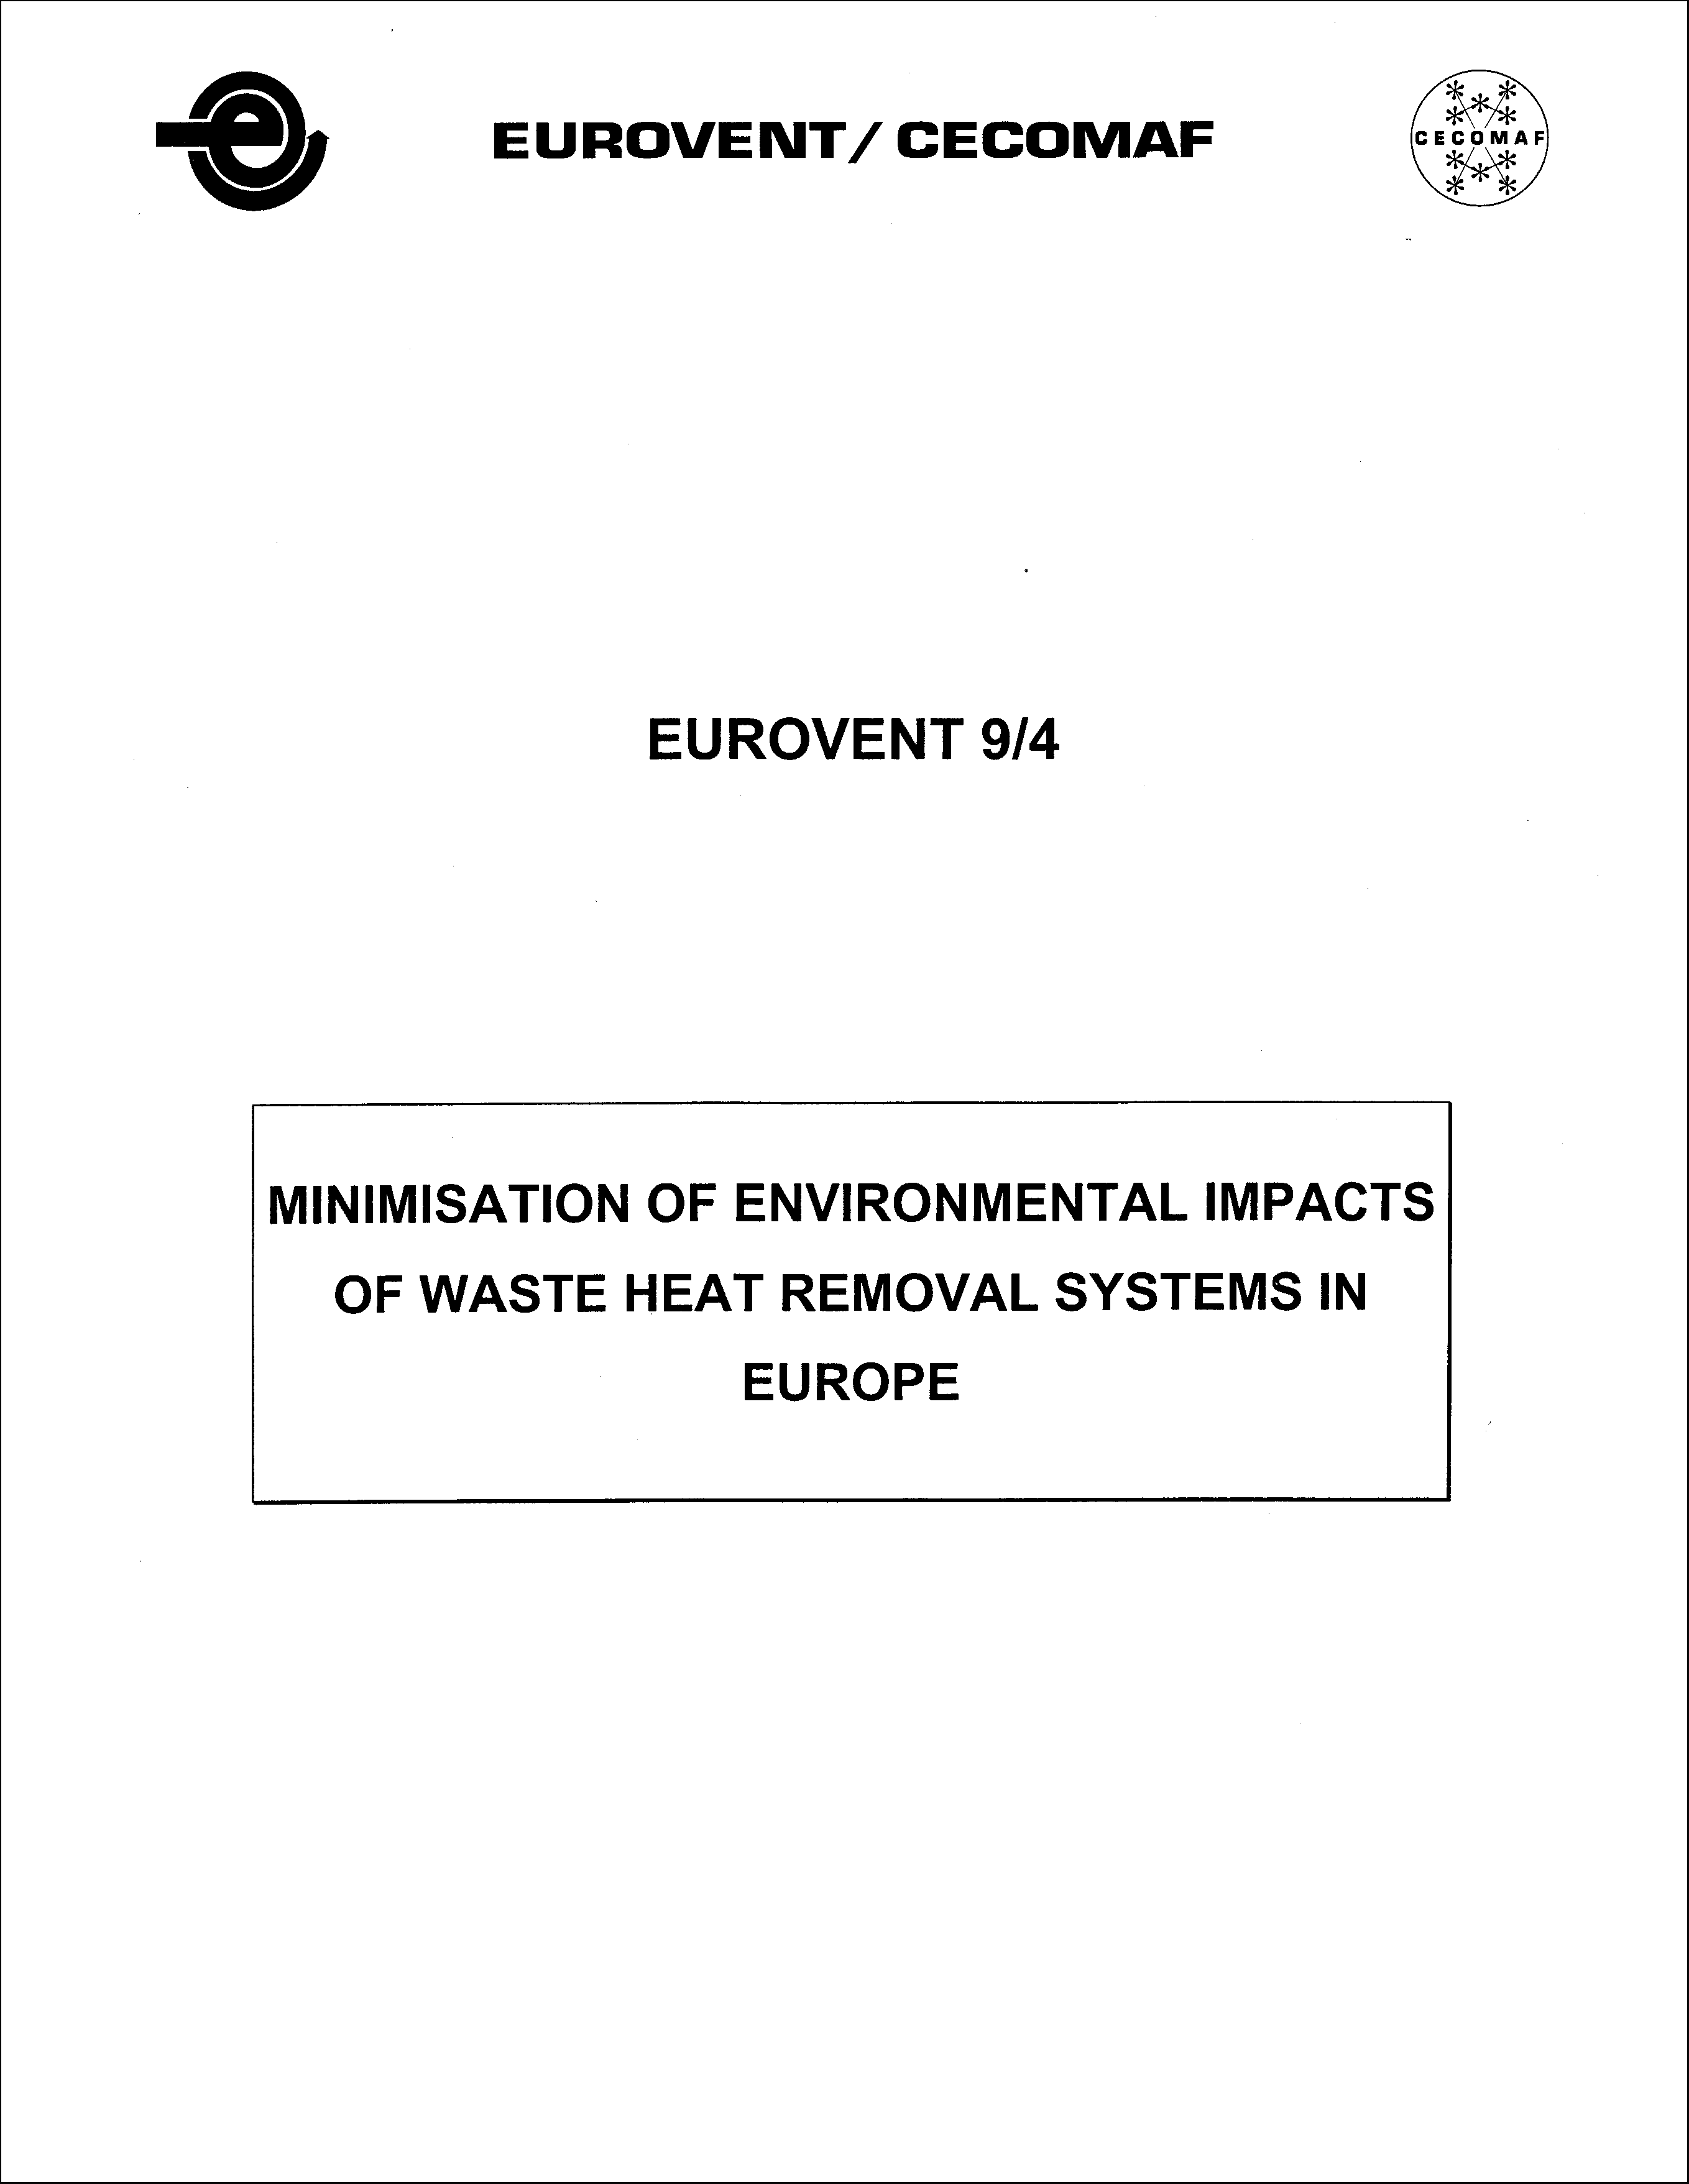 1999 - Minimisation of environmental impacts of waste heat removal systems in Europe